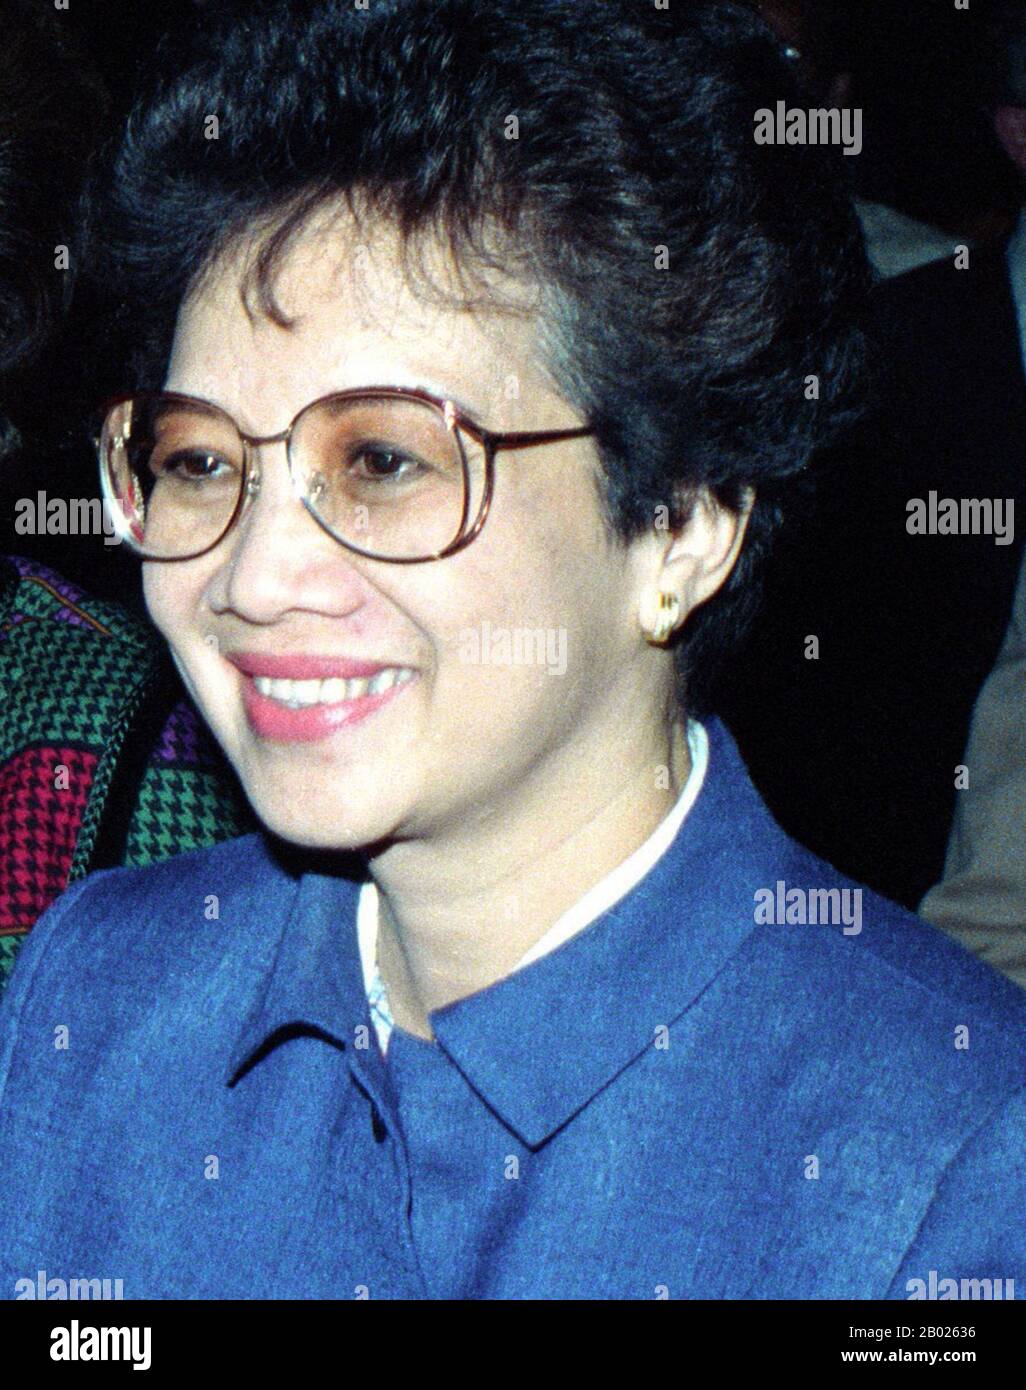 Maria Corazon Sumulong 'Cory' Cojuangco-Aquino (January 25, 1933 – August 1, 2009) was a Filipino politician who served as the 11th President of the Philippines, the first woman to hold that office, and the first female president in Asia. Regarded as 'The Mother of Philippine Democracy', Cory led the 1986 People Power Revolution, which toppled Ferdinand Marcos and restored democracy in the Philippines. She was named Time magazine's 'Woman of the Year' in 1986. Stock Photo